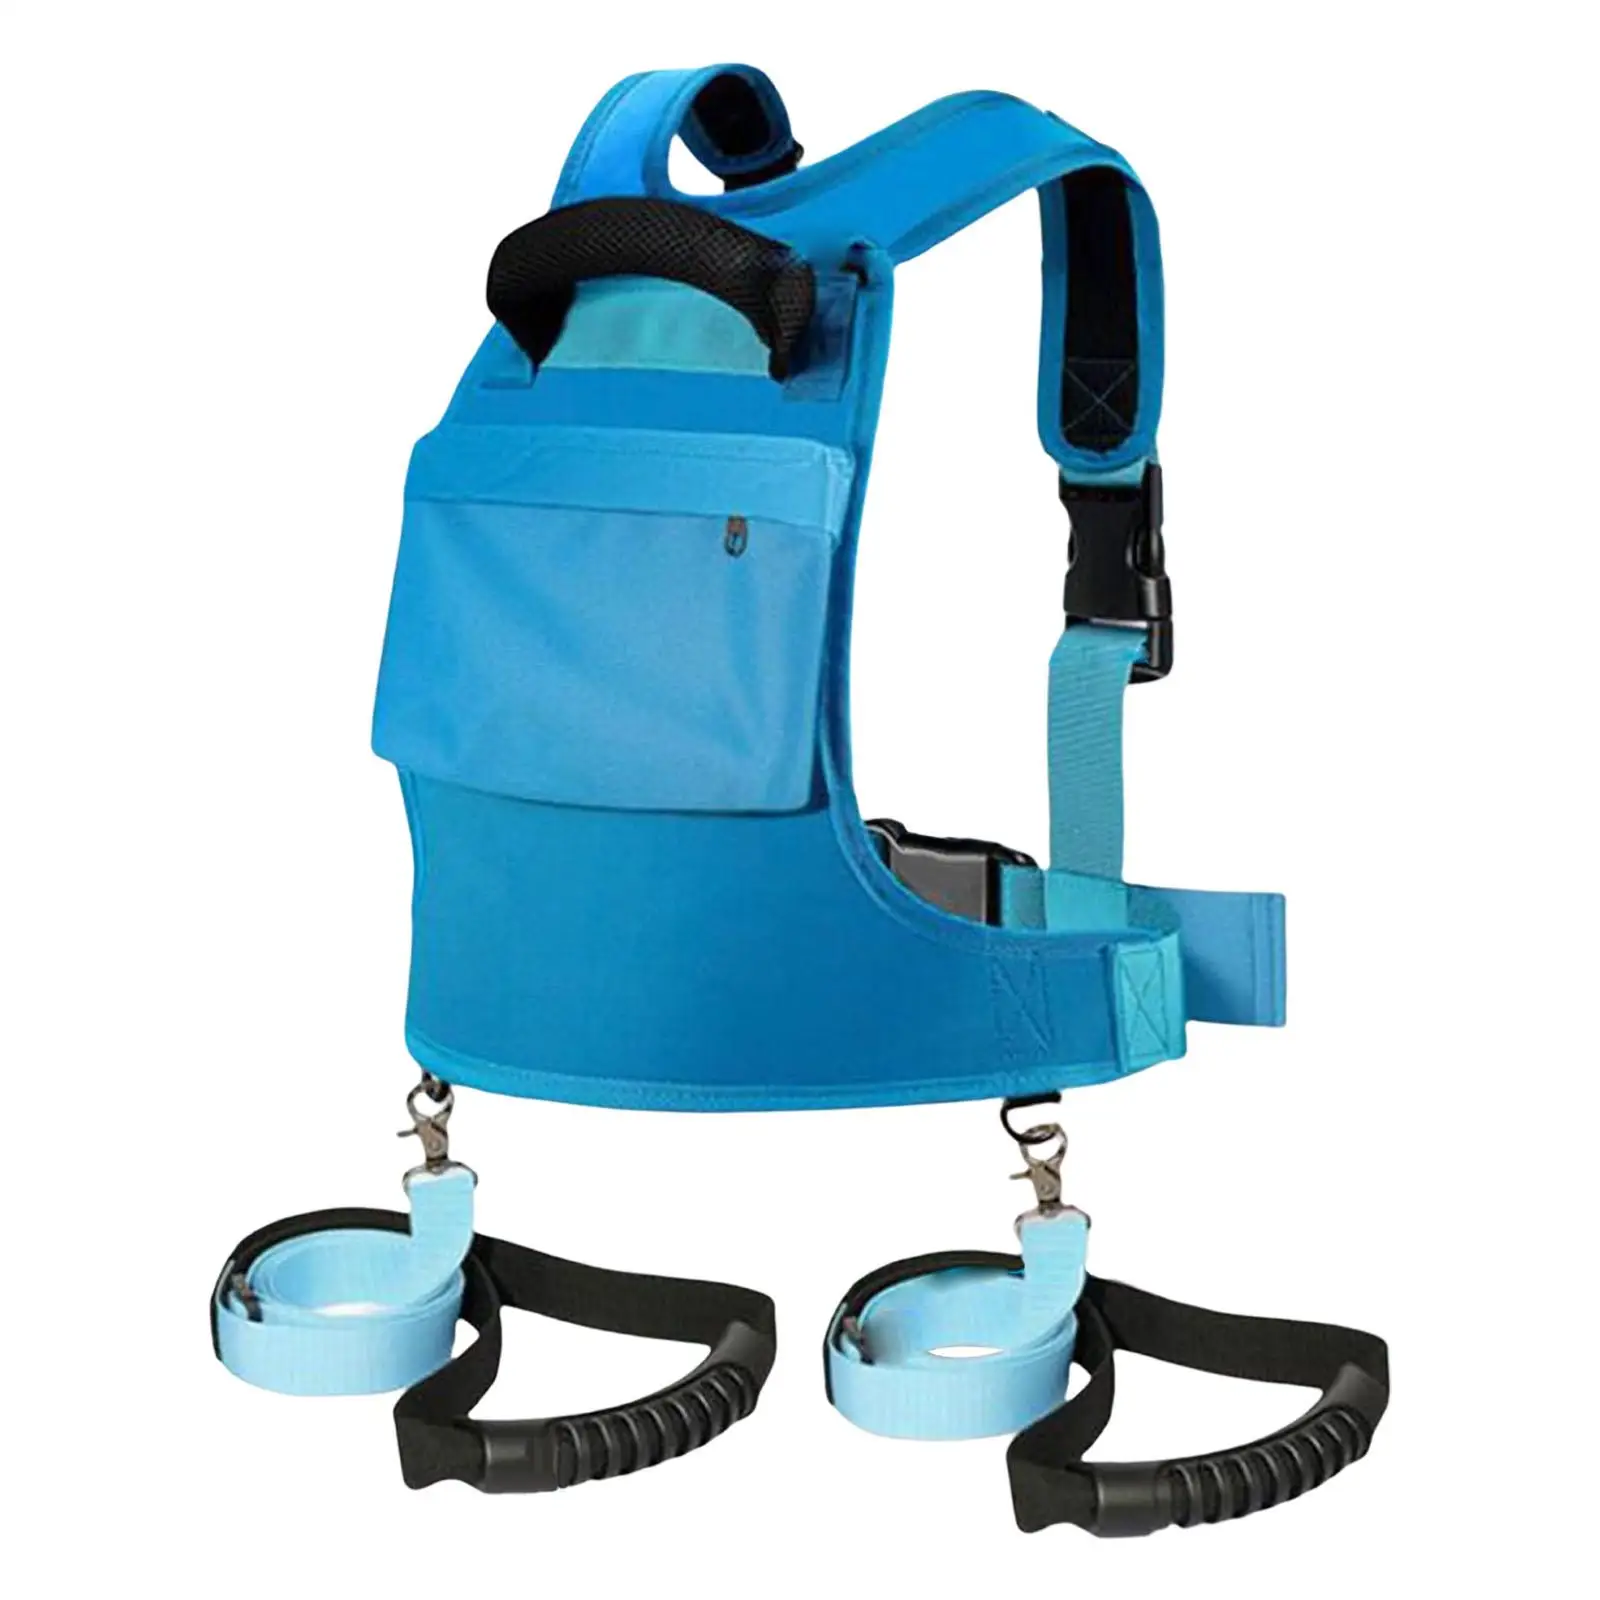 Kids Ski Harness with Handle Safety Shoulder Strap Ski Shoulder Harness for for 2-8 Years Old Girls Boys Skiing Winter Sports